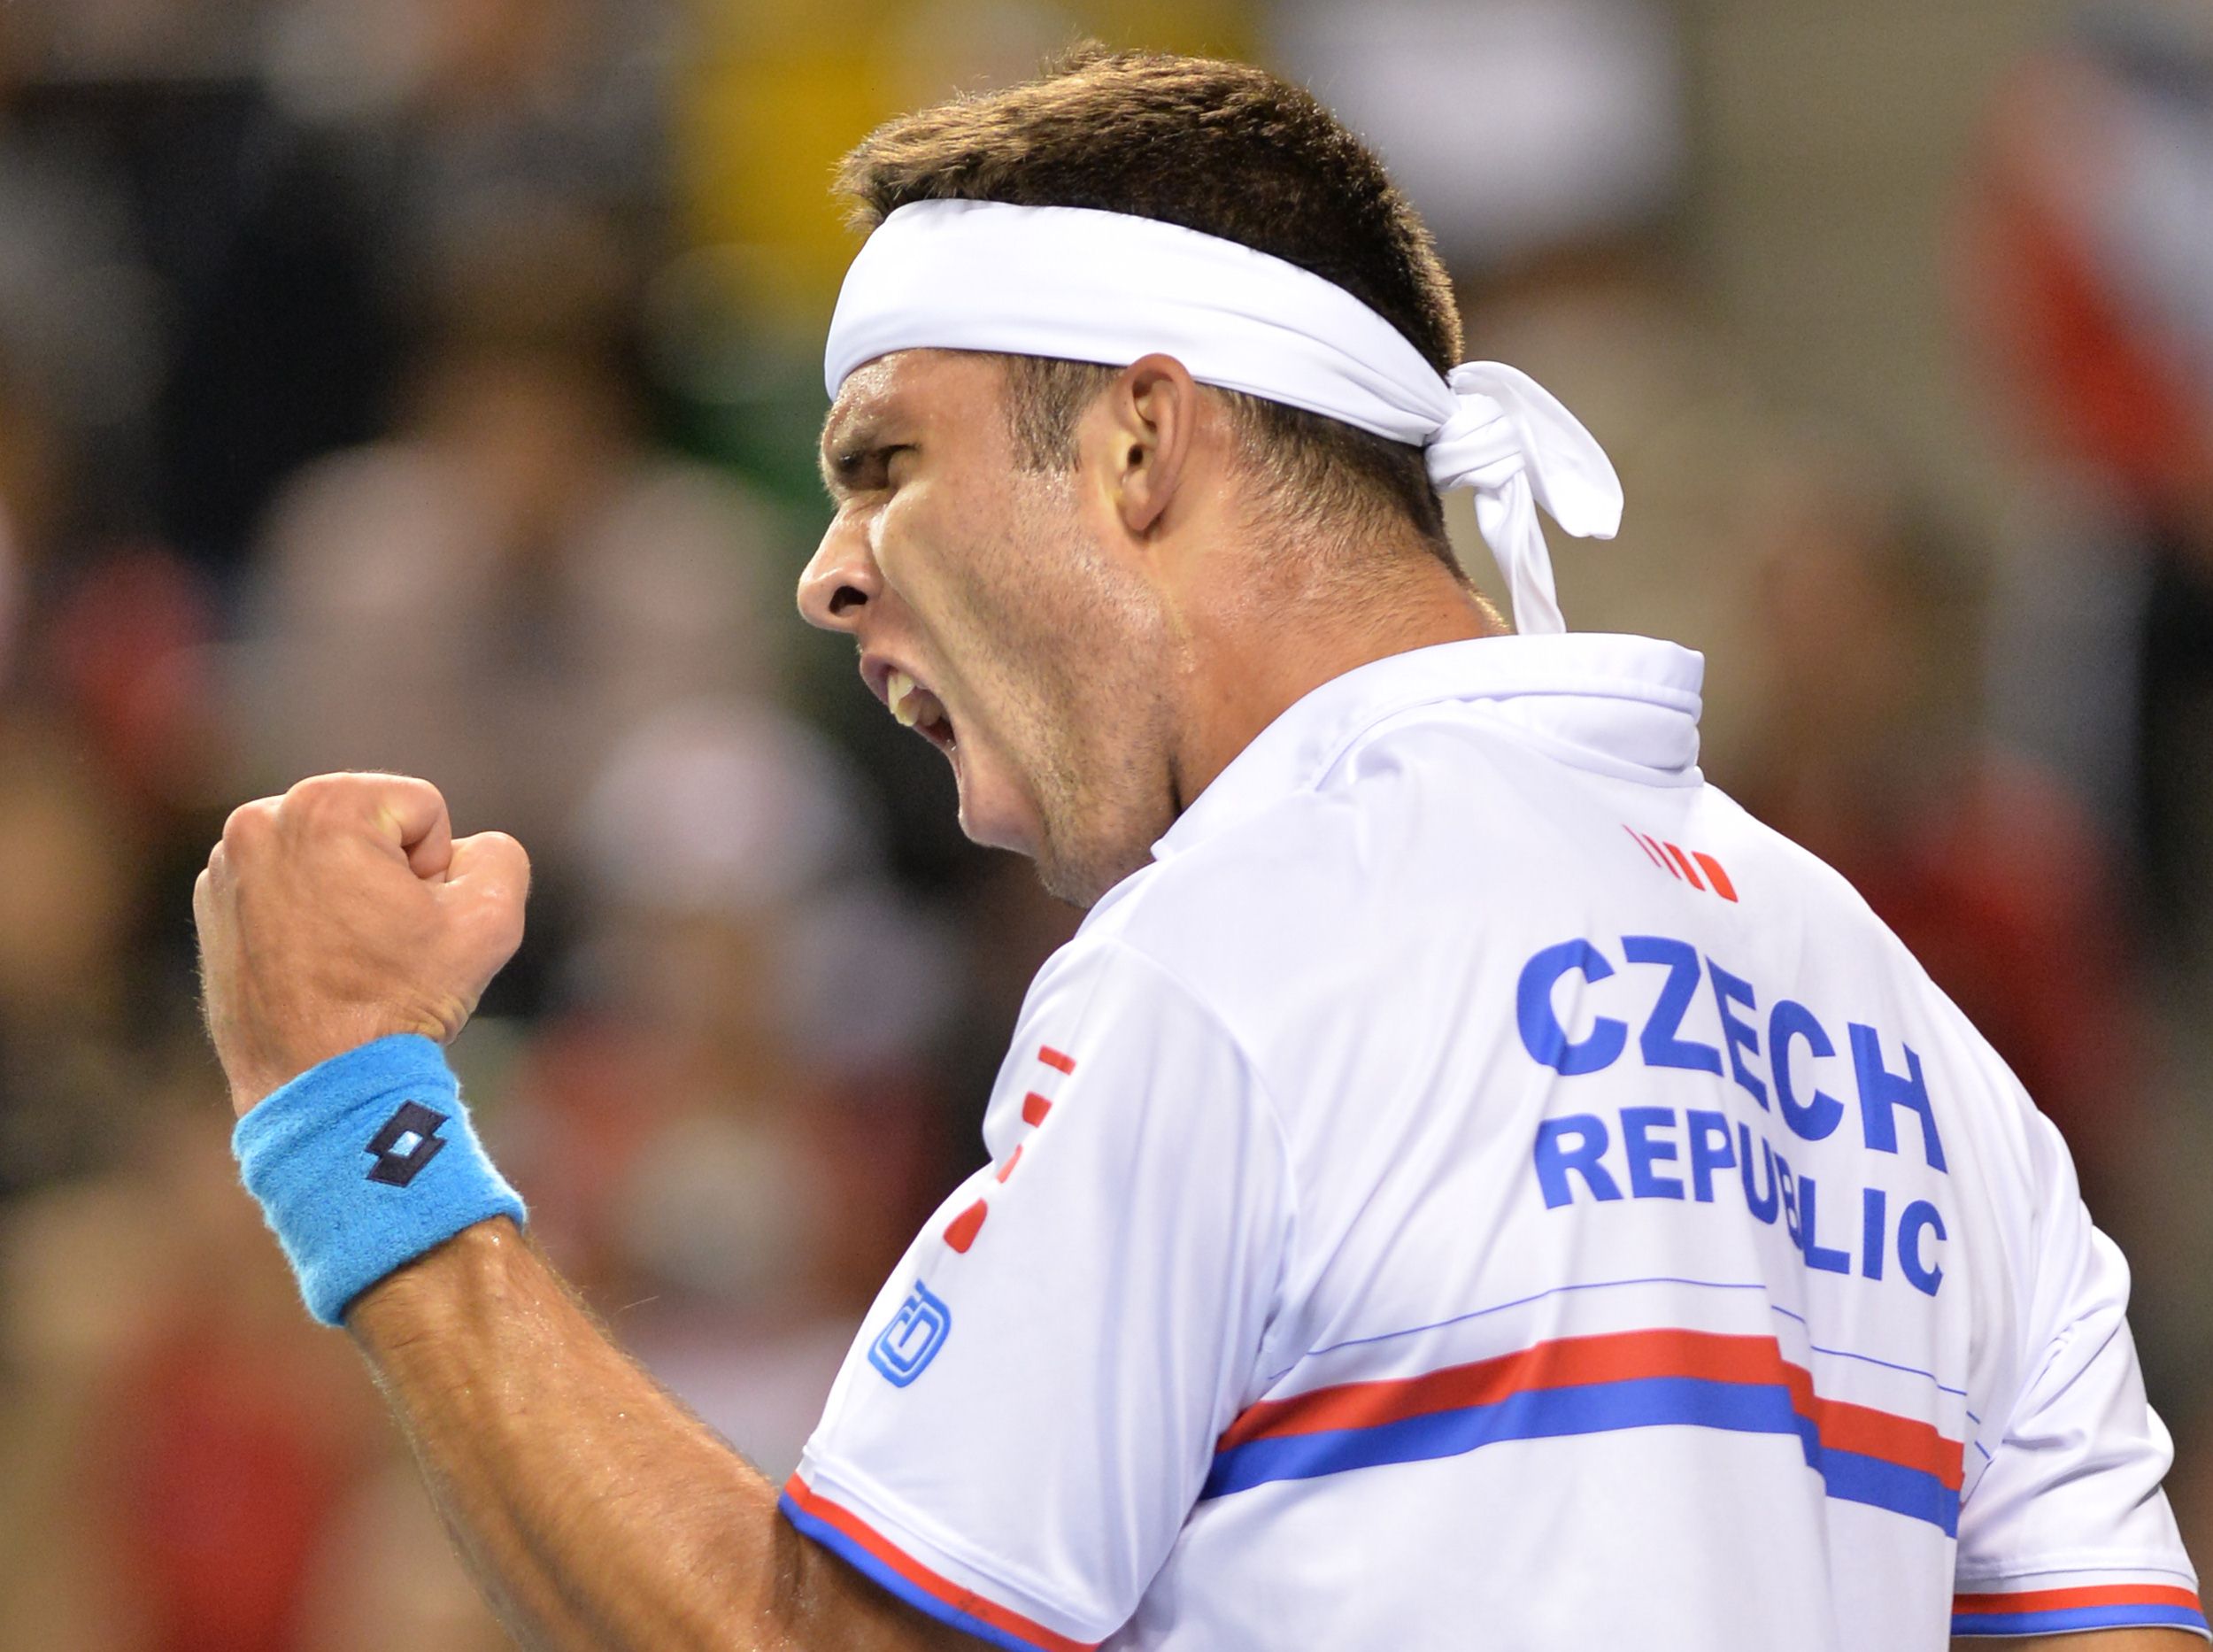 Jiri Vesely of the Czech Republic celebrates after winning a point against Japan's Taro Daniel. Vesely won the match 6-4, 6-4. Photo: AFP